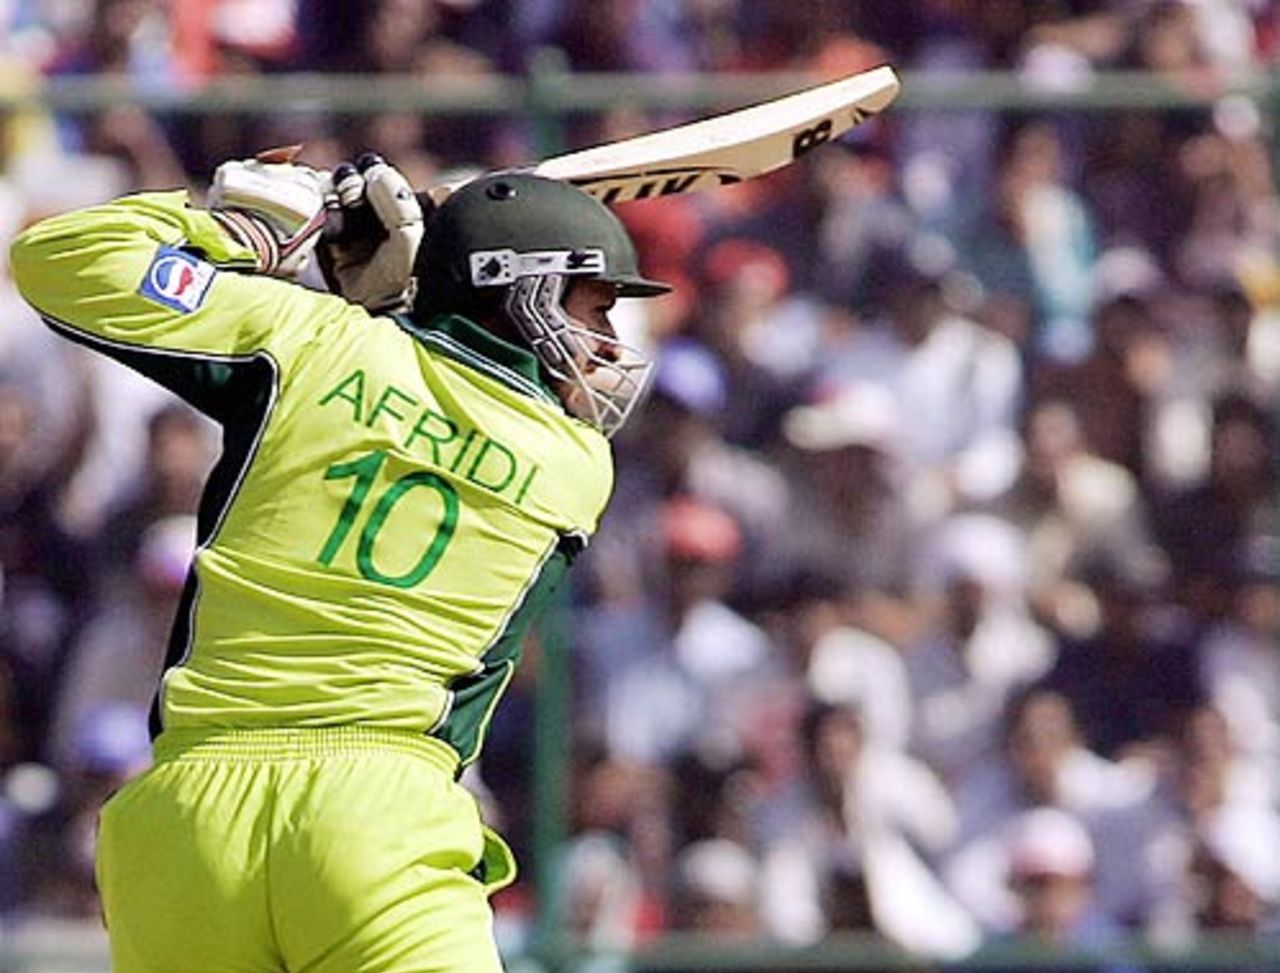 Shahid Afridi set the trend early in the innings, playing the way he knows best, 6th ODI, Delhi, April 17, 2005